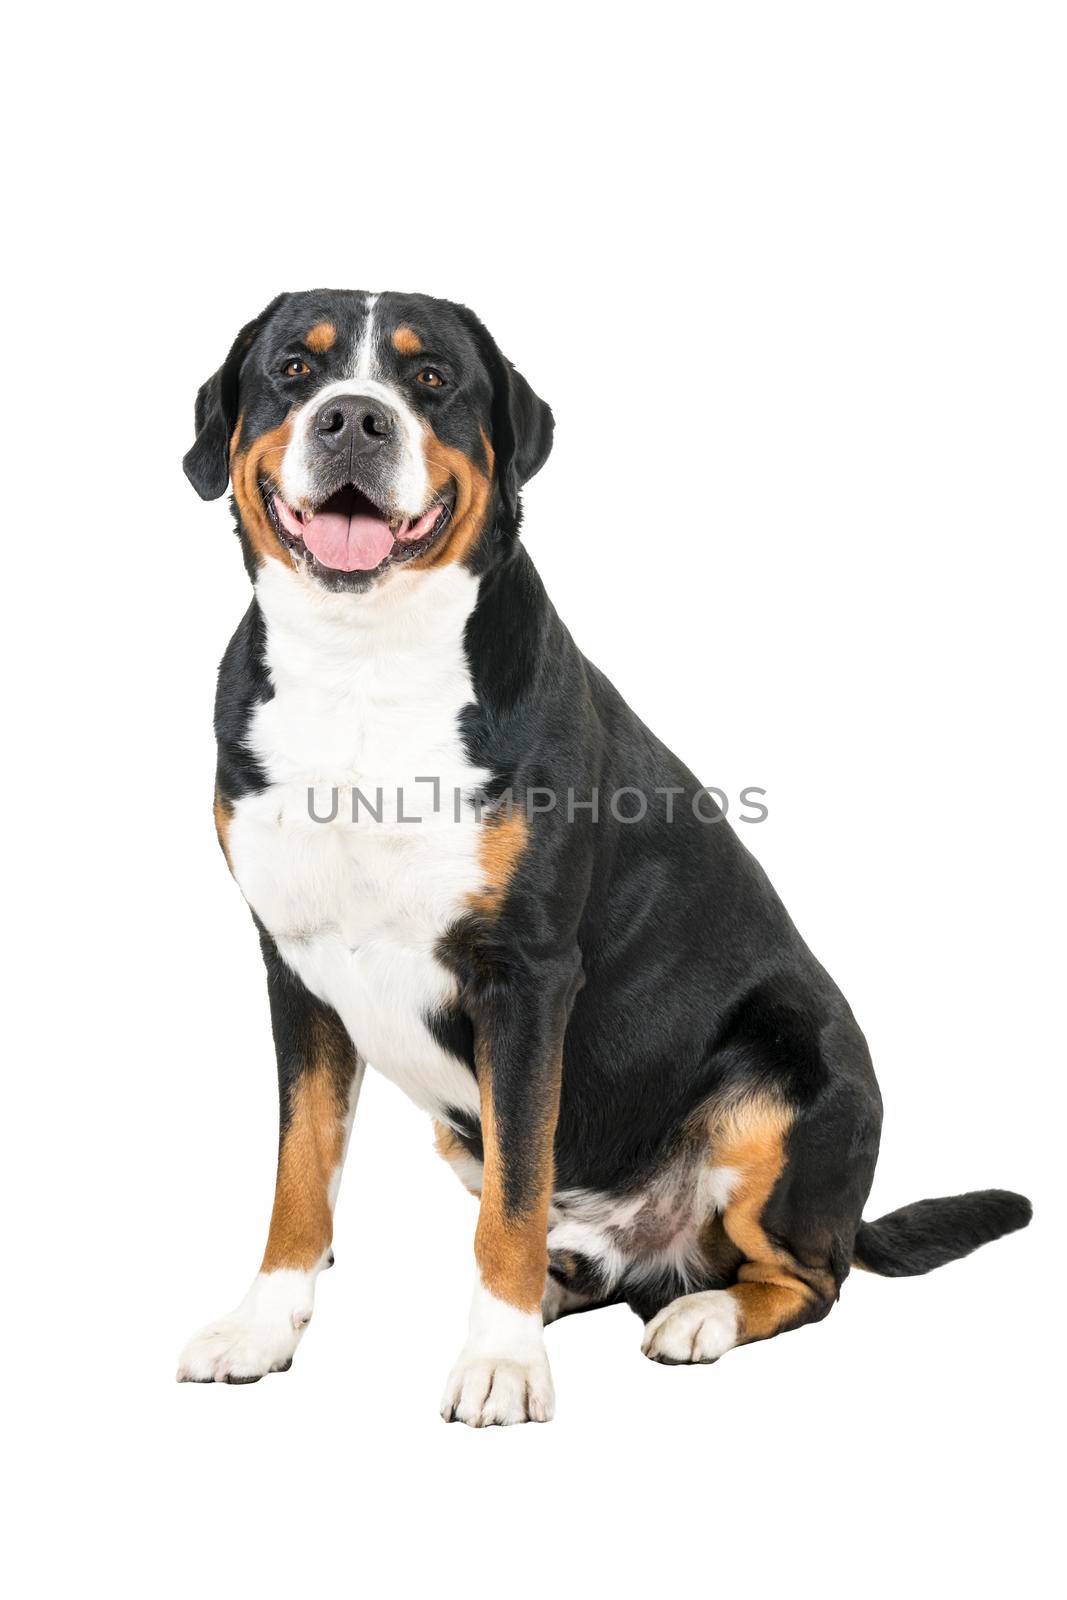 A Greater Swiss Mountain Dog sitting side ways and looking into the camera